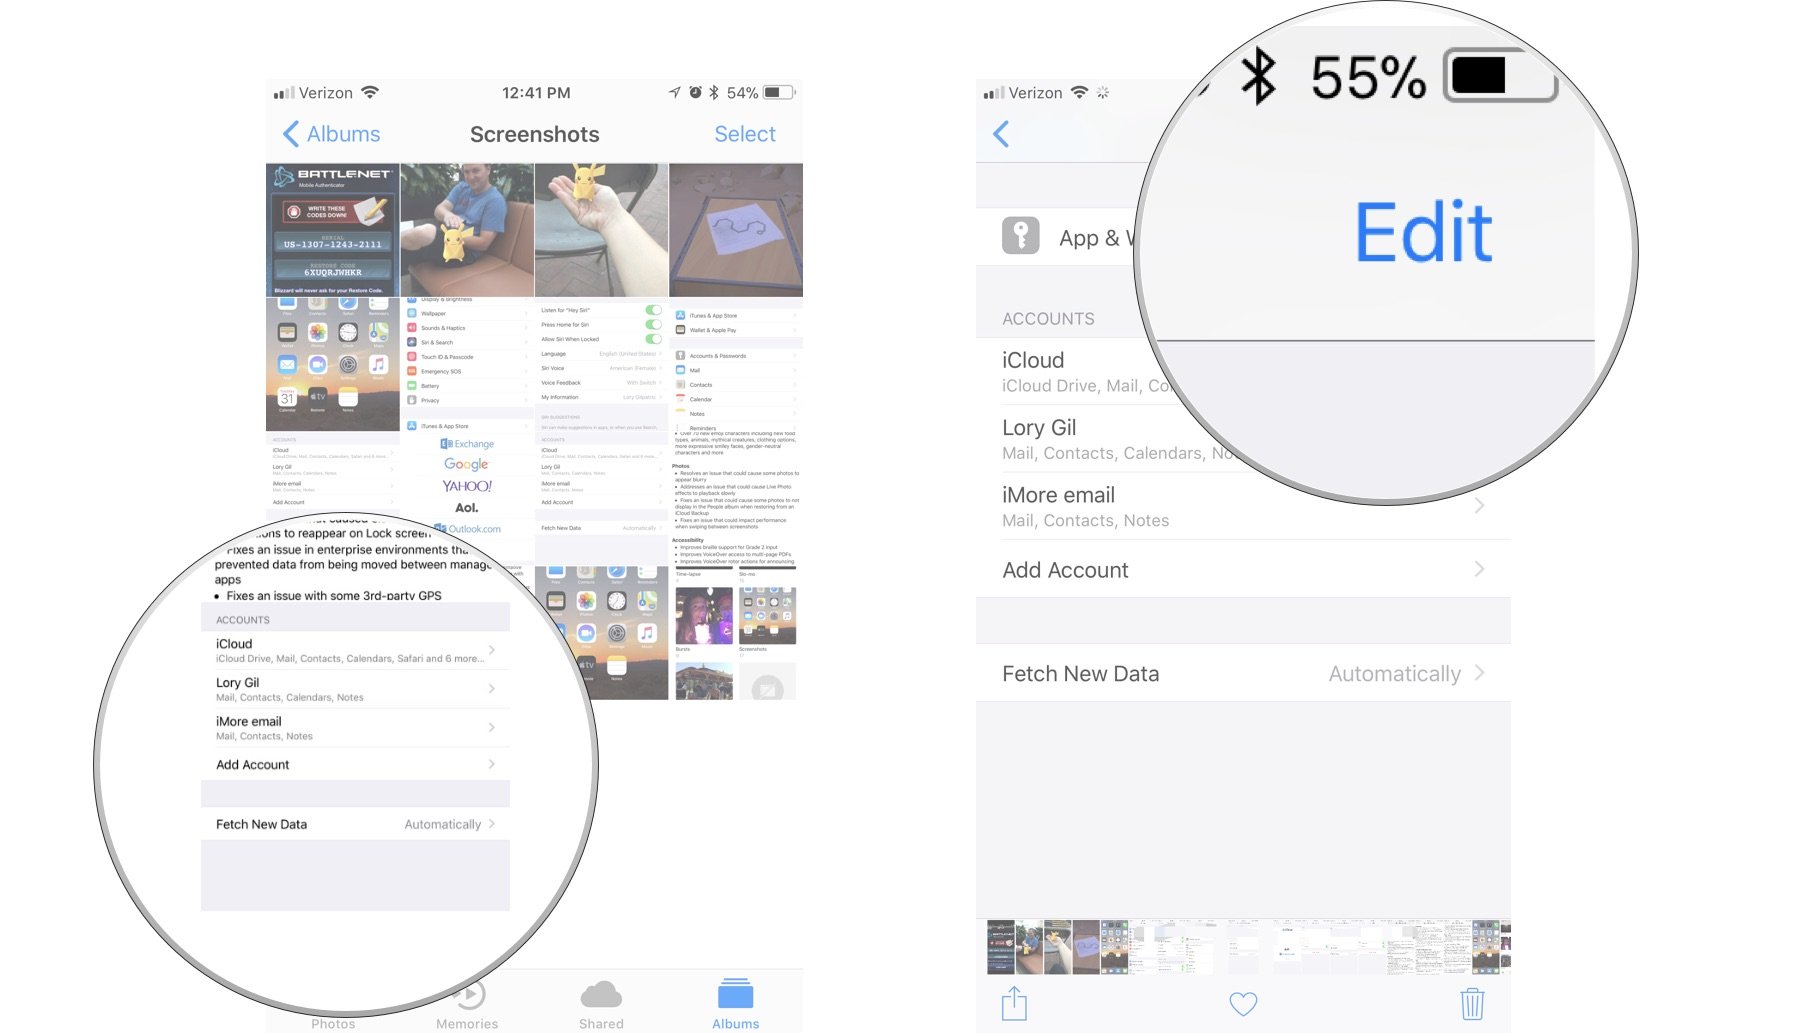 How to view and edit screenshots on iPhone by showing: Tap a screenshot, then edit, favorite, share, or delete it